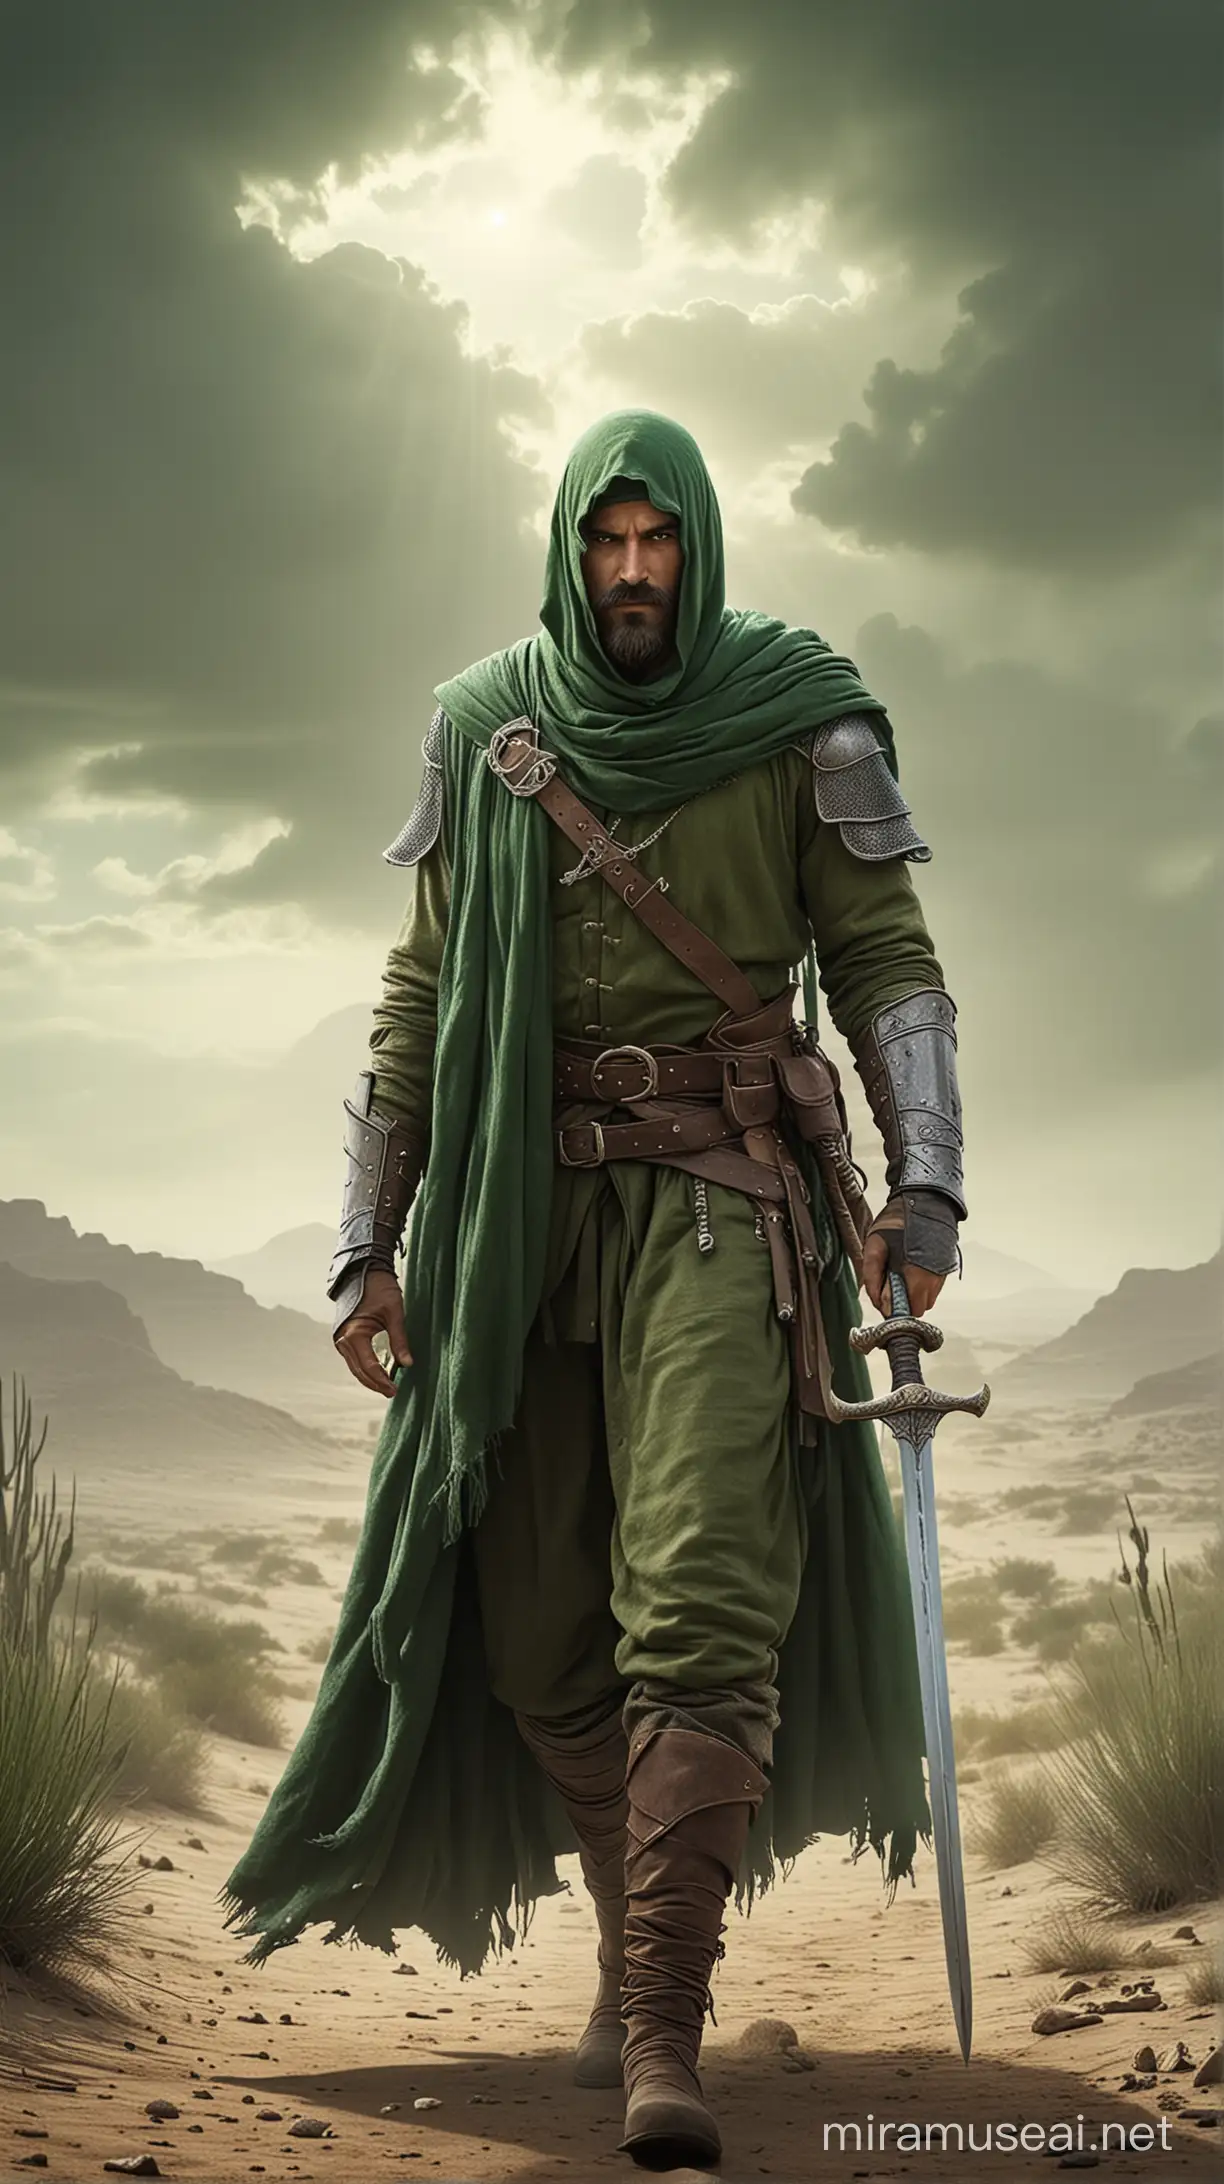 A man wearing green medieval battle attire, covering his head by green scarf, standing seriously in desert area, while carrying up two swords, medium beard and mustache, cloudy atmosphere, dramatic light, atmospheric mood, digital painting, realistic version 6